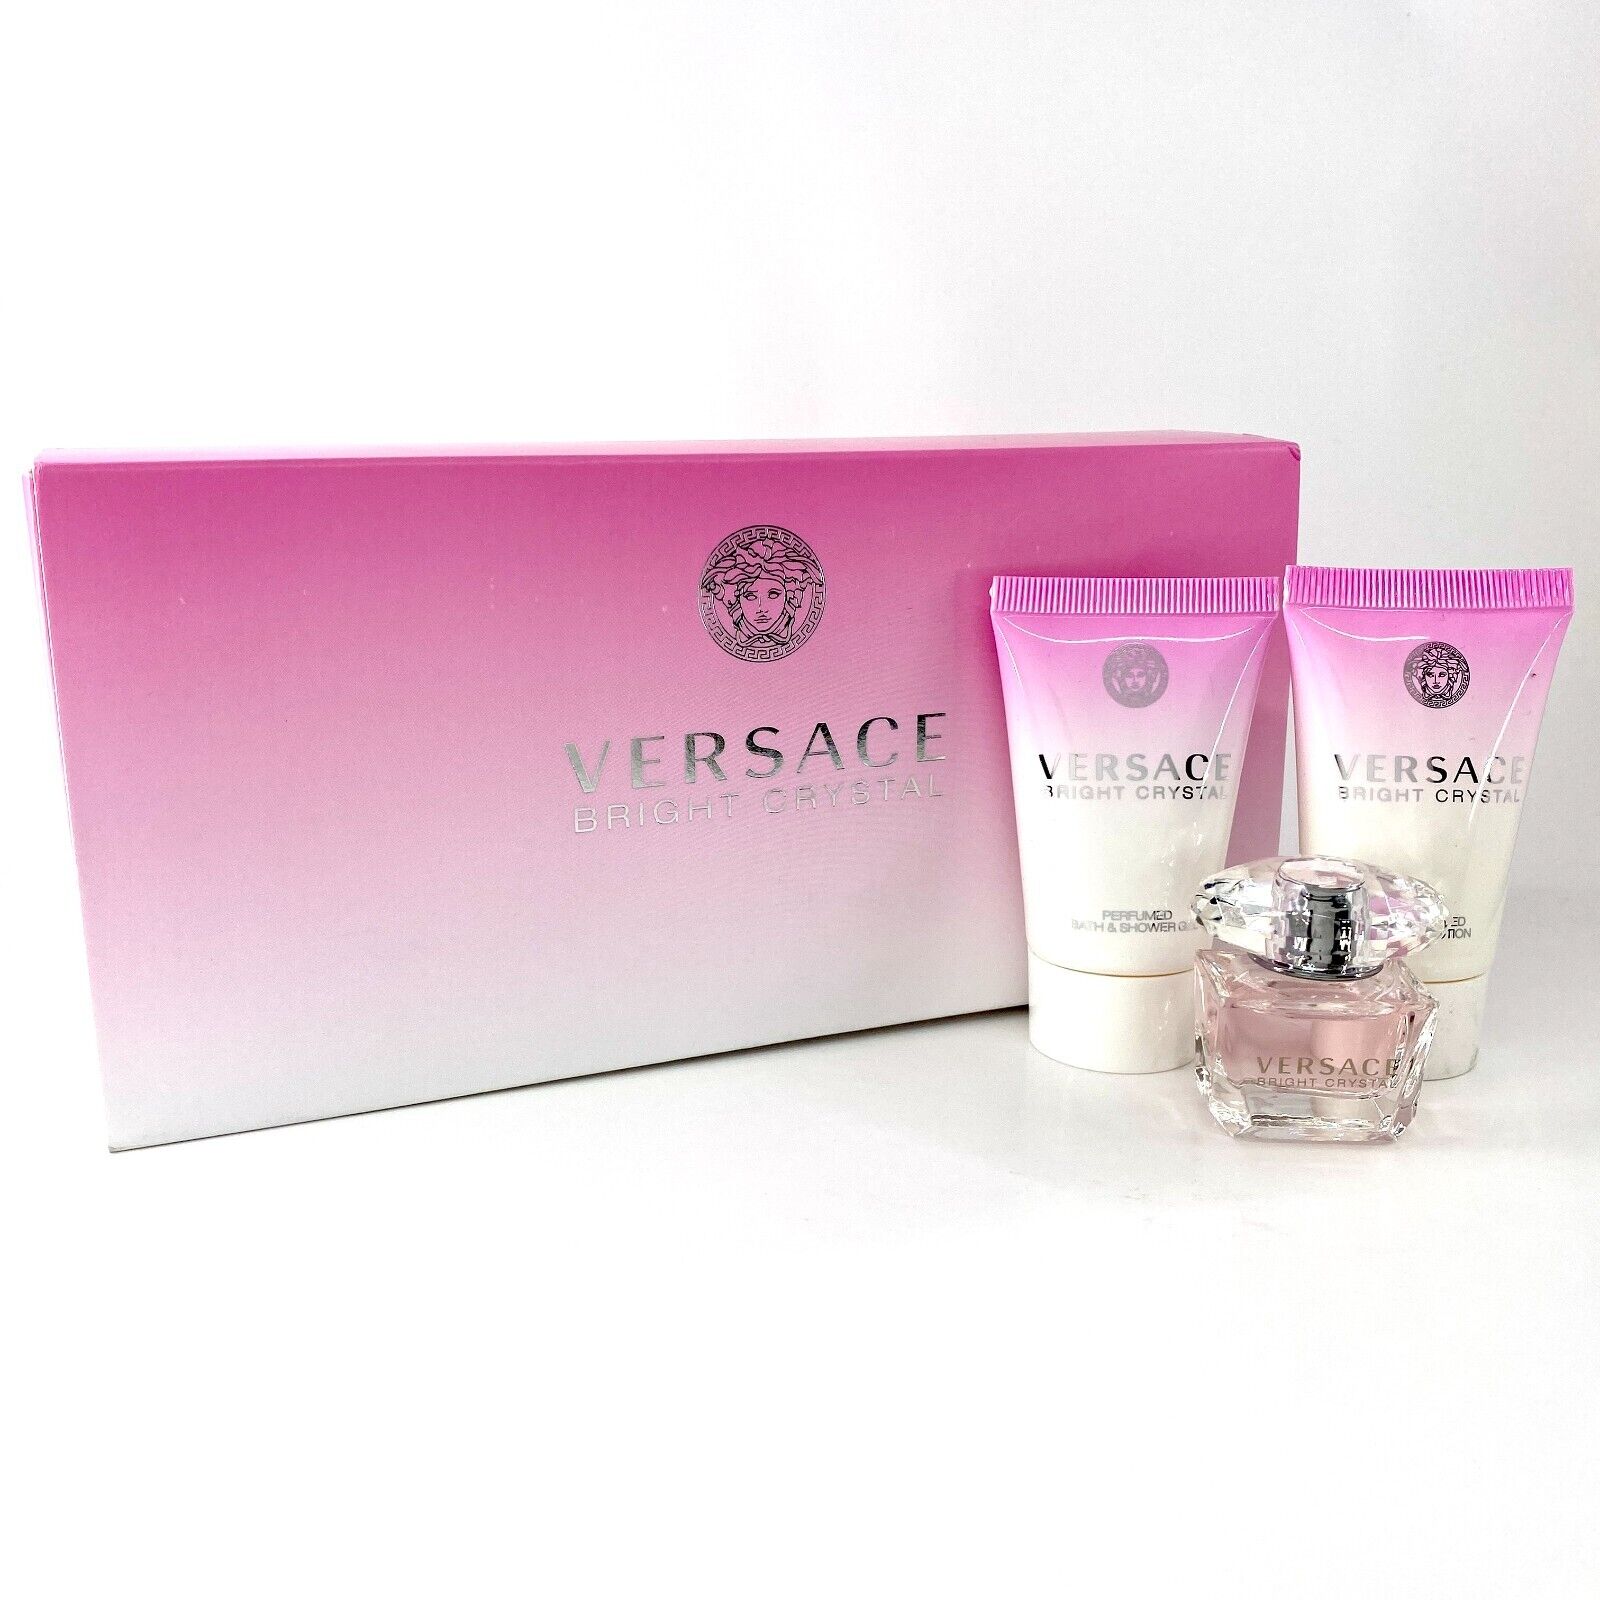 VERSACE BRIGHT CRYSTAL pour femme Set of 3 pieces MINI PERFUME NEW